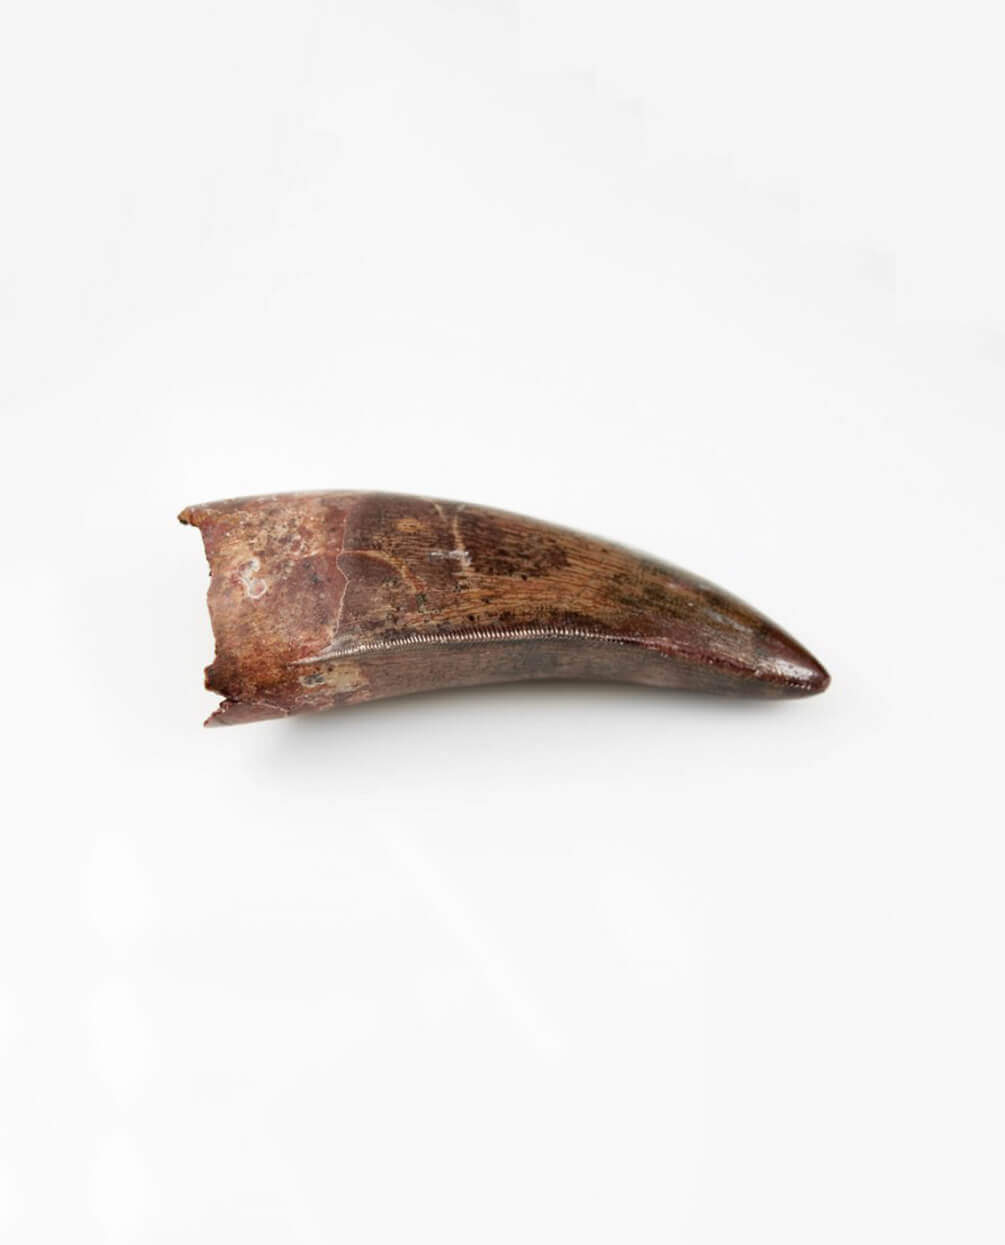 Museum-quality Carcharodontosaurus saharicus dinosaur fossil tooth for sale measuring 76mm at THE FOSSIL STORE